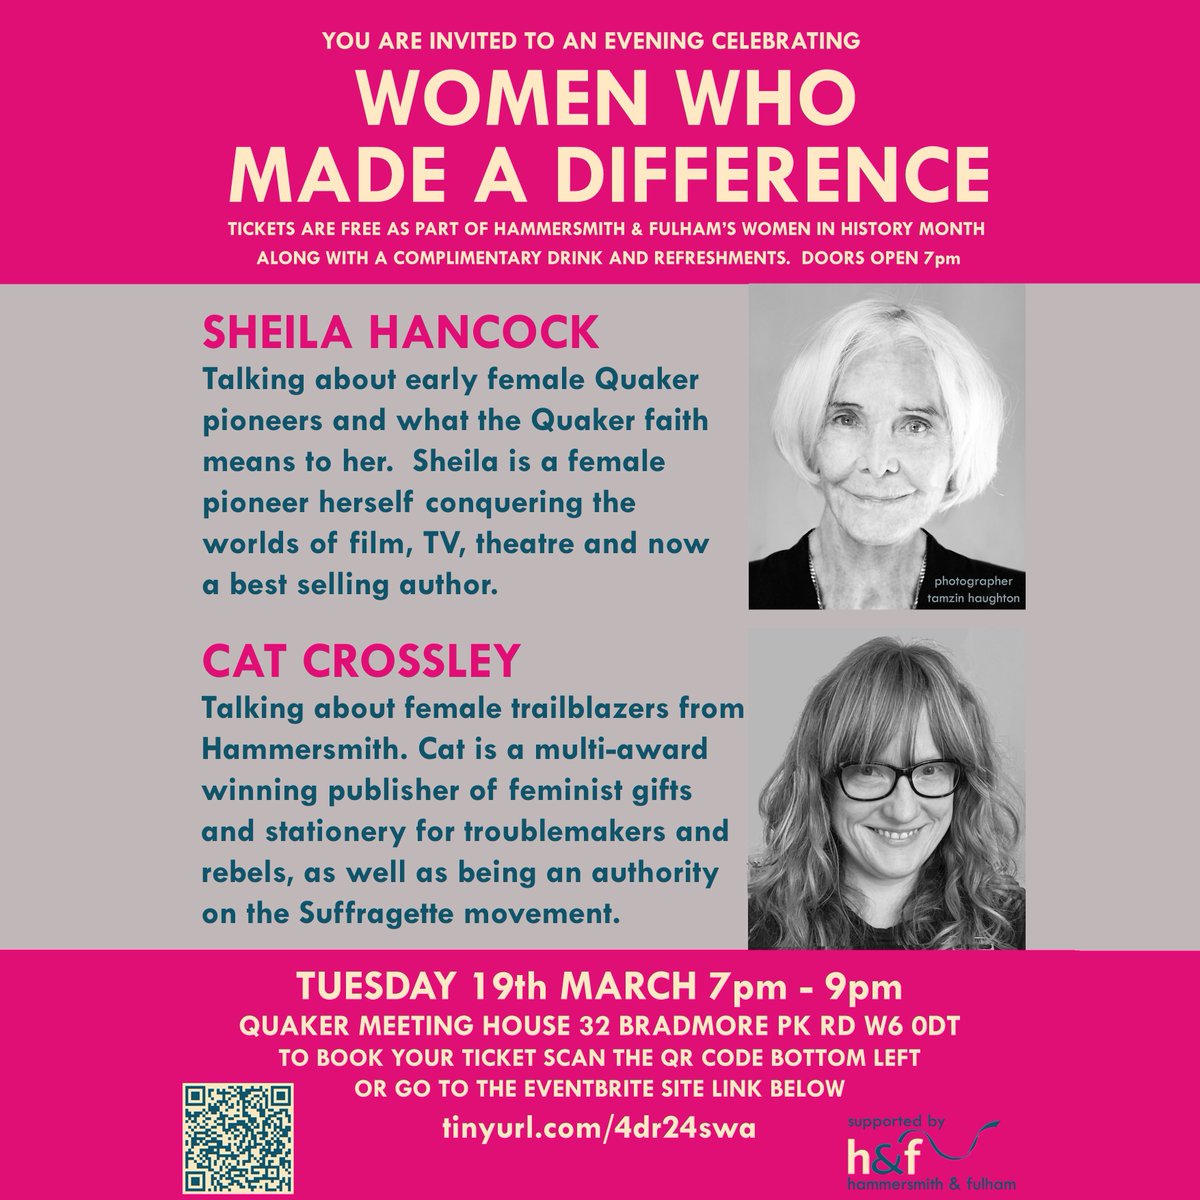 Somehow, I'm doing a talk alongside this absolute legend. 😮 🤷‍♀️ This is a one-off, with very limited tickets. Here is the link. If you're in London, come to this truly HERSTORIC event! tinyurl.com/4dr24swa #WomenInHistory #Herstory #SheilaHancock #WomensHistoryMonth #WHM24